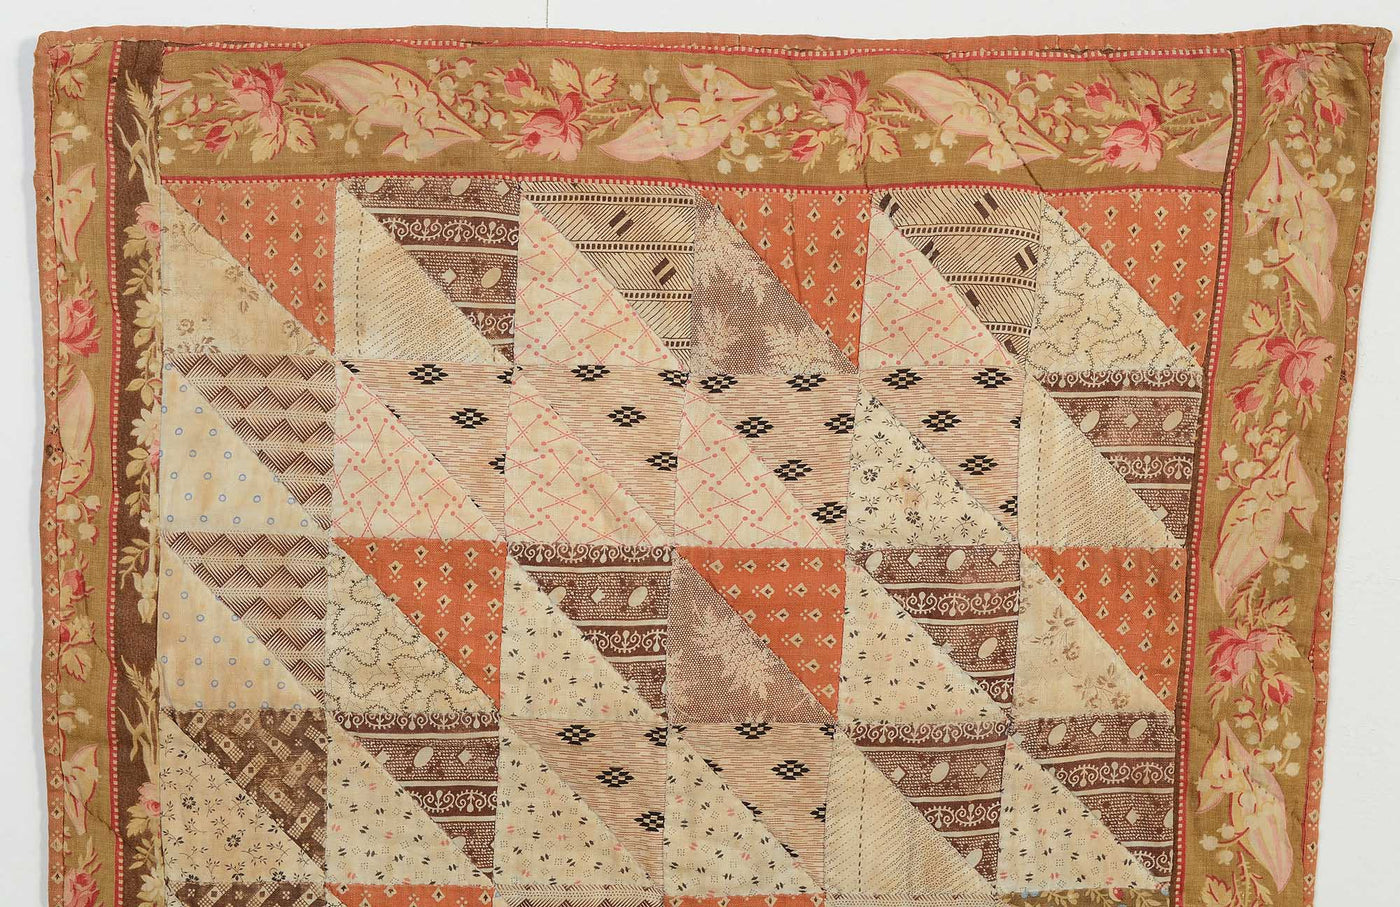 Top half of Thousand Pyramids Doll Quilt #1380833.